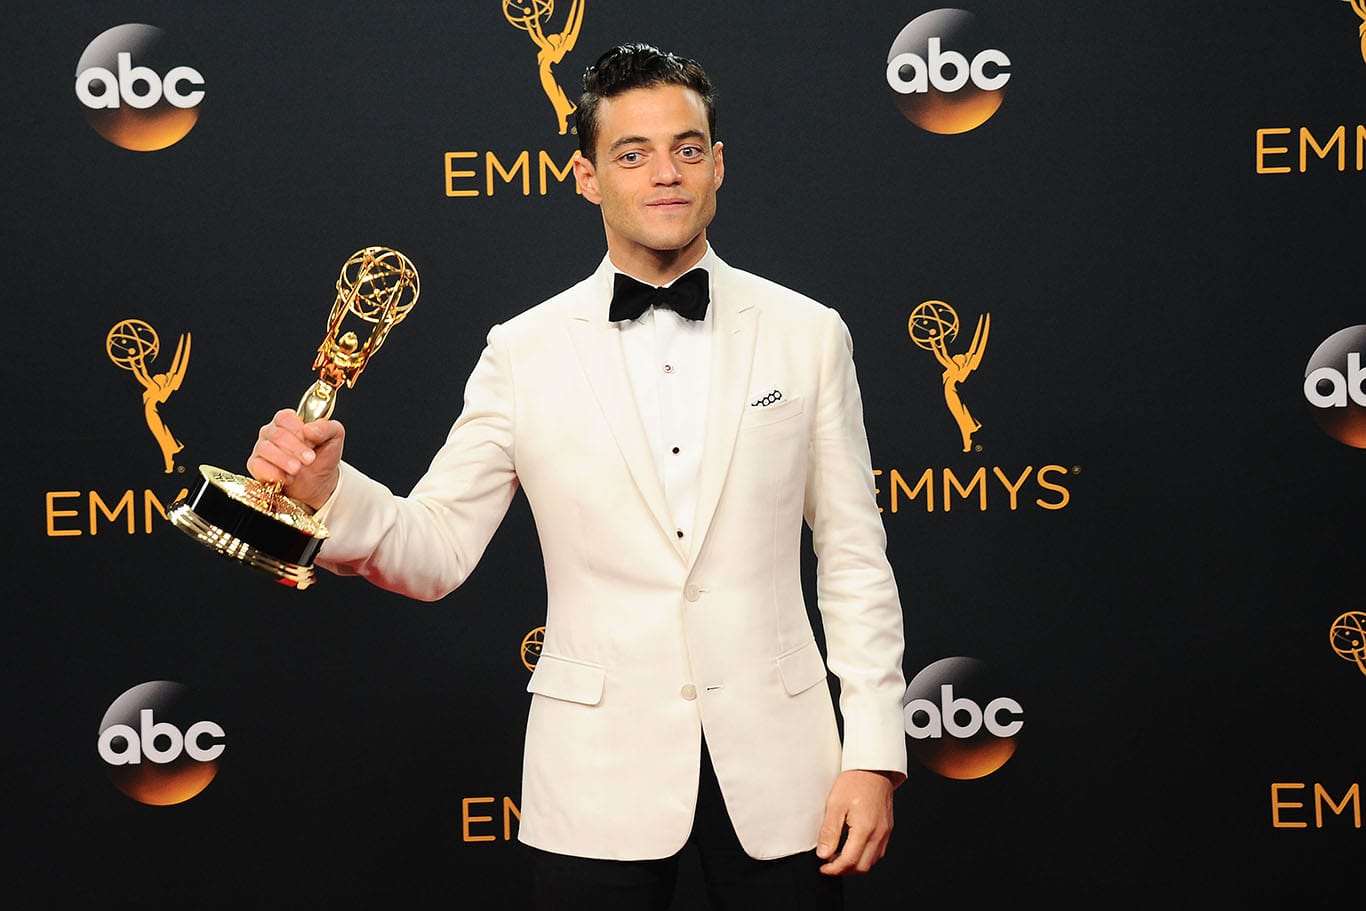 , Los Angeles, CA - 9/18/2016 - The 68th Primetime Emmy Awards - Press Room at Microsoft Theater -PICTURED: Rami Malek -PHOTO by: Kyle Rover/startraksphoto.com -KR71412 Editorial - Rights Managed Image - Please contact www.startraksphoto.com for licensing fee Startraks Photo New York, NY For licensing please call 212-414-9464 or email sales@startraksphoto.com Startraks Photo reserves the right to pursue unauthorized users of this image. If you violate our intellectual property you may be liable for actual damages, loss of income, and profits you derive from the use of this image, and where appropriate, the cost of collection and/or statutory damages.